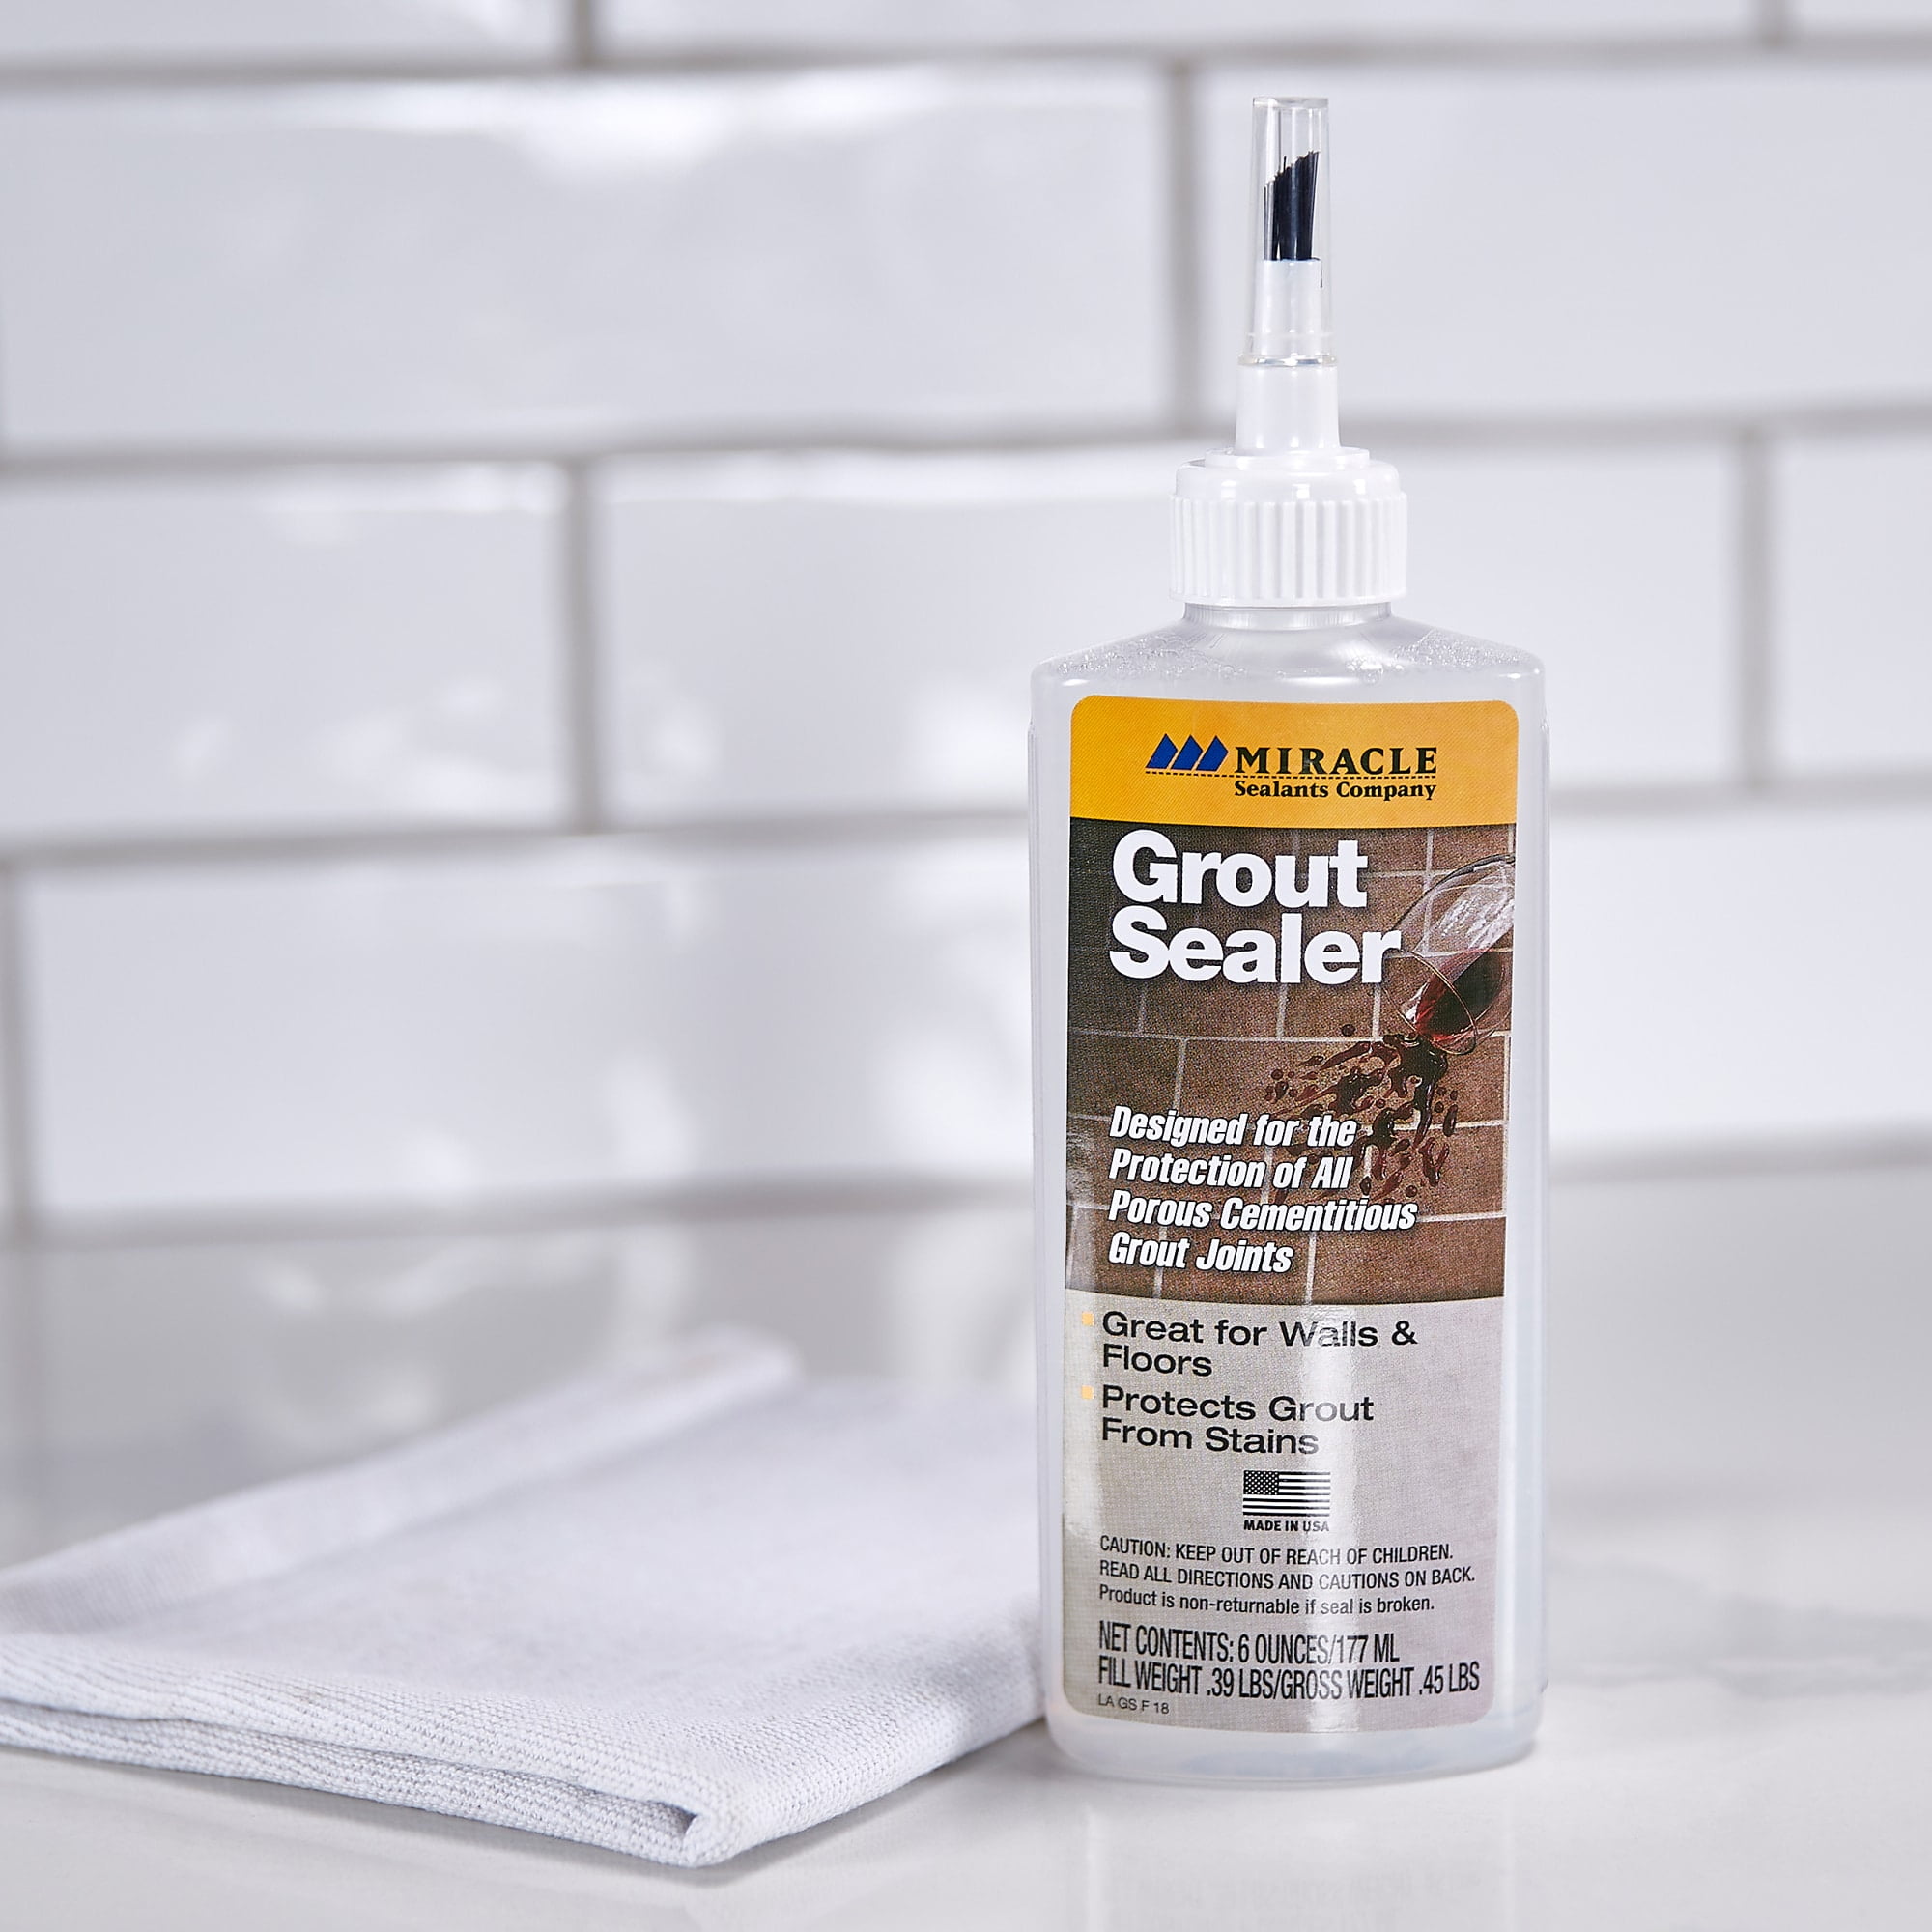 EJWQWQE Tile Grout - White Grout Filler Repairs Renews Fills Tube,Fast  Drying Grout Repair, Heavy-Duty Grout Cleaner - And Renews Grout Line